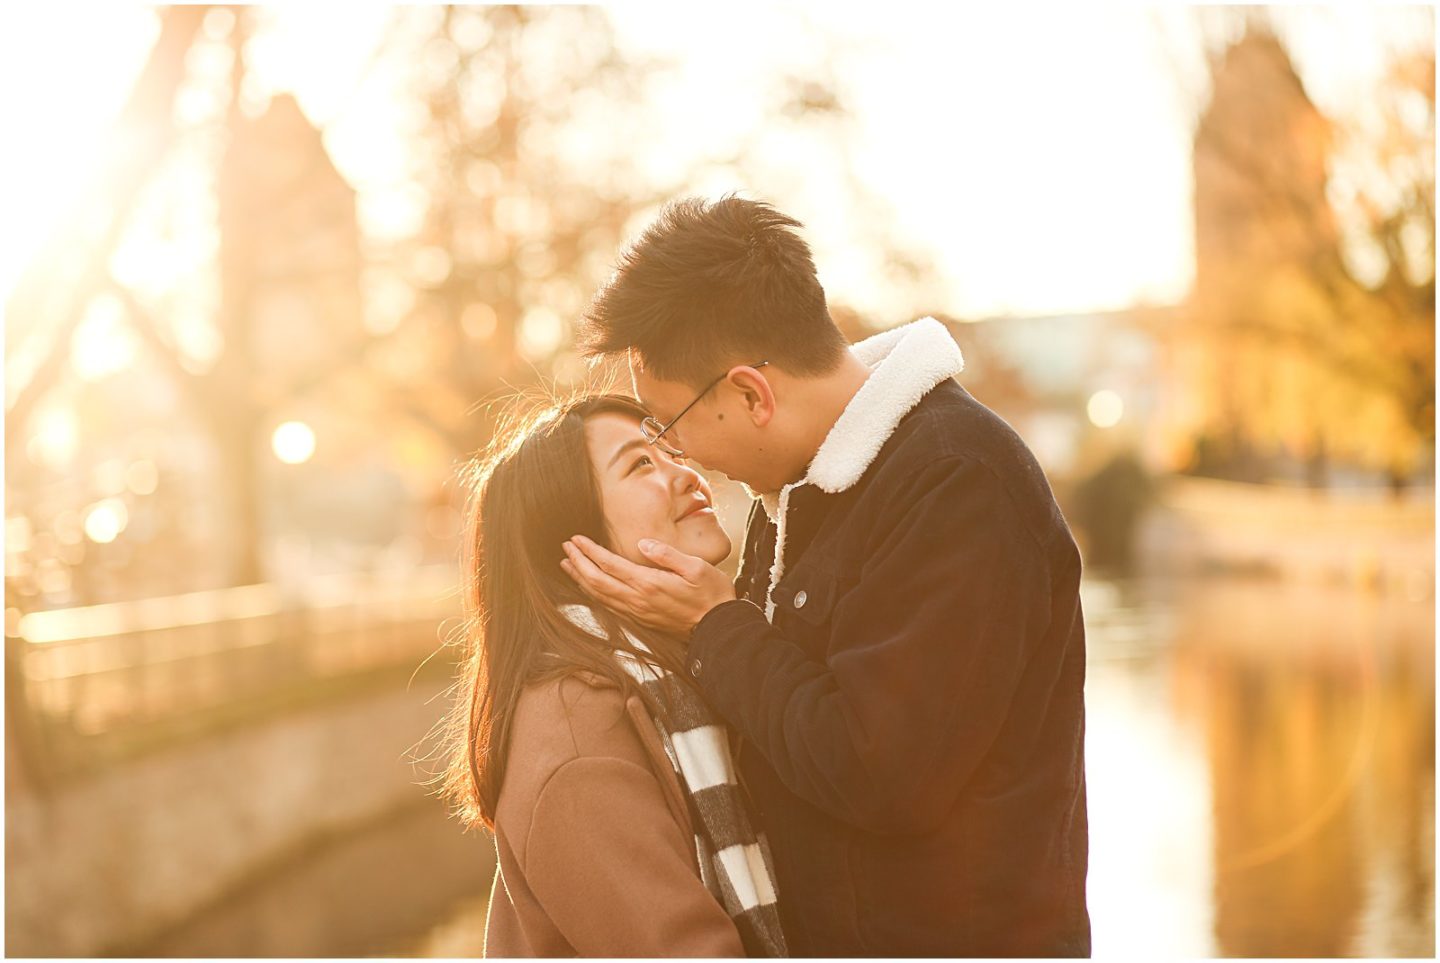 golden hour engagement photos in petite france strasbourg